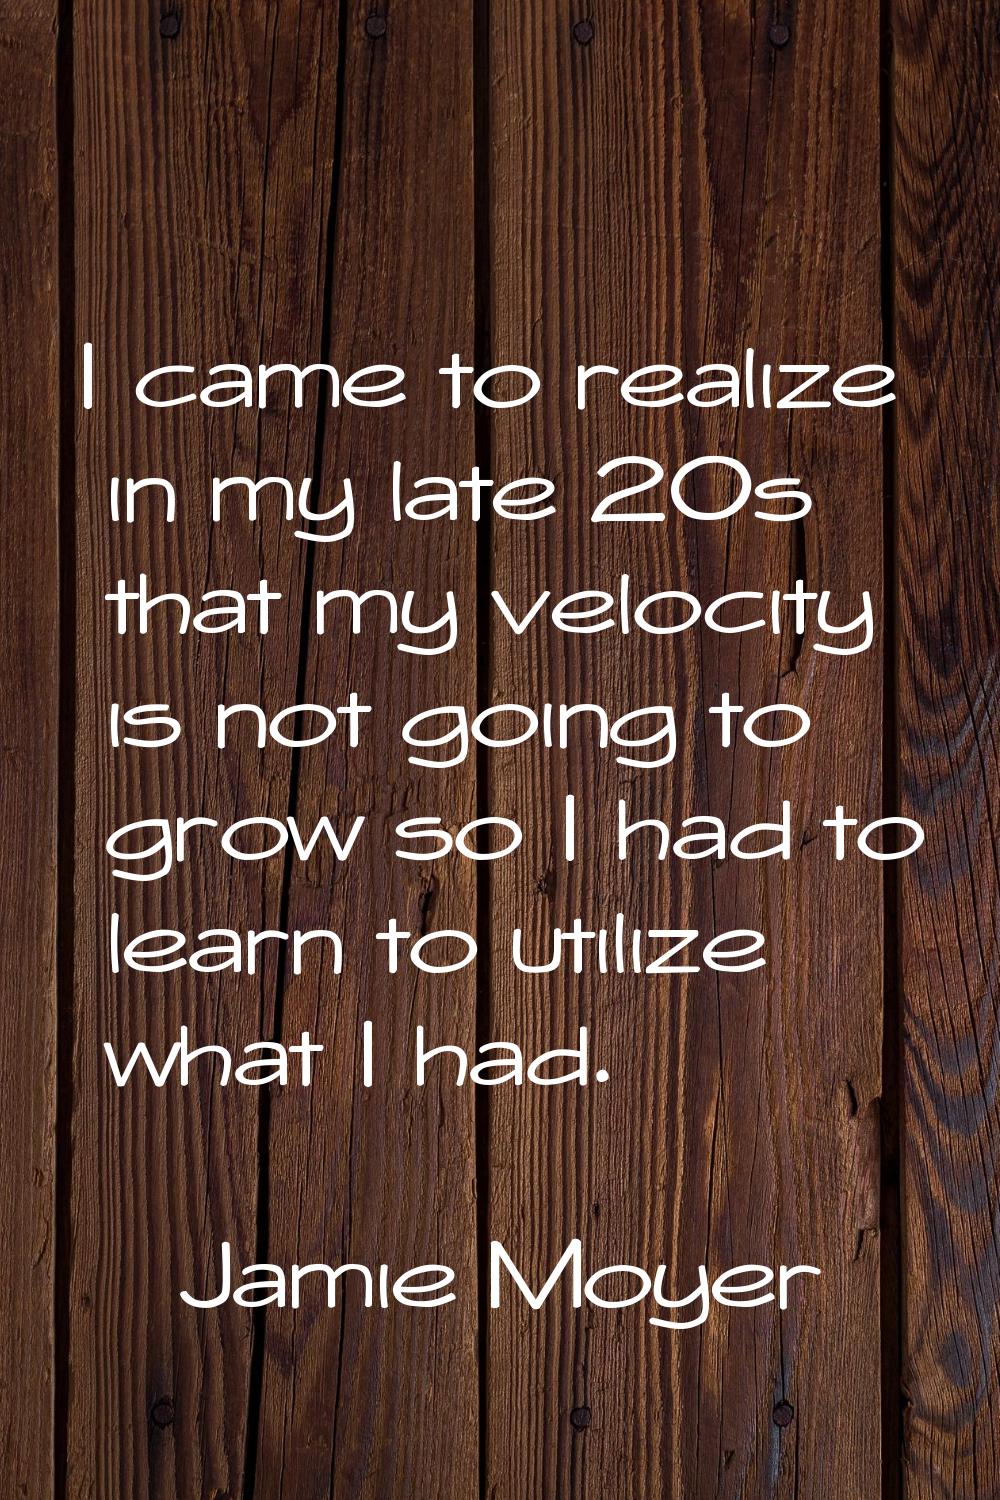 I came to realize in my late 20s that my velocity is not going to grow so I had to learn to utilize